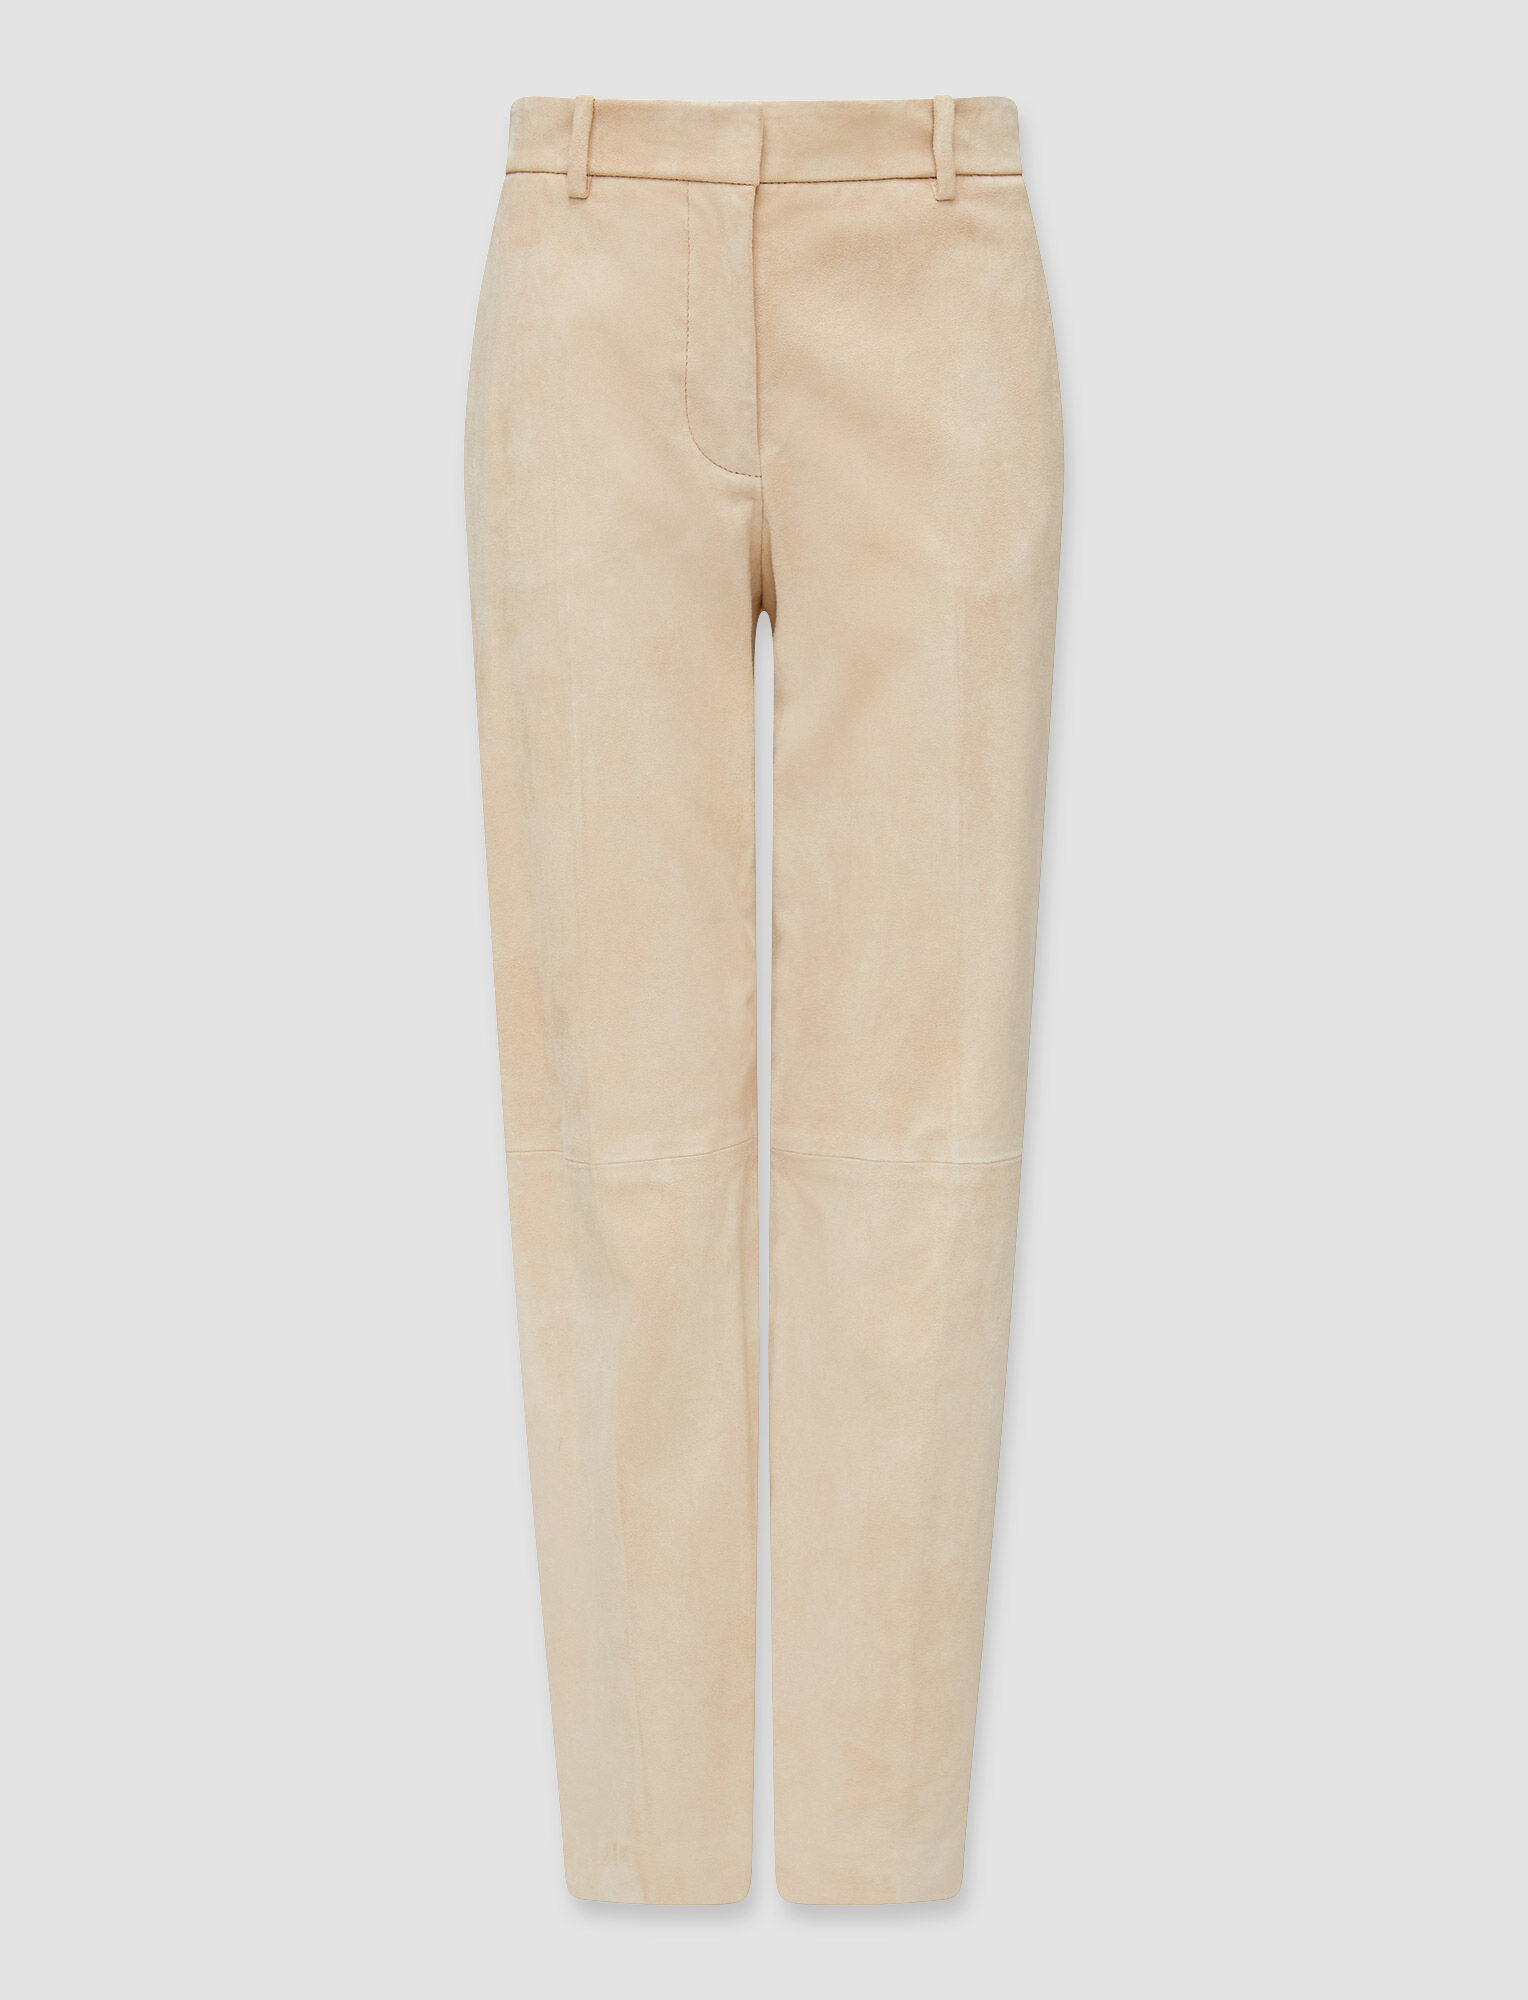 Joseph, Suede Stretch Coleman Trousers, in Salmon